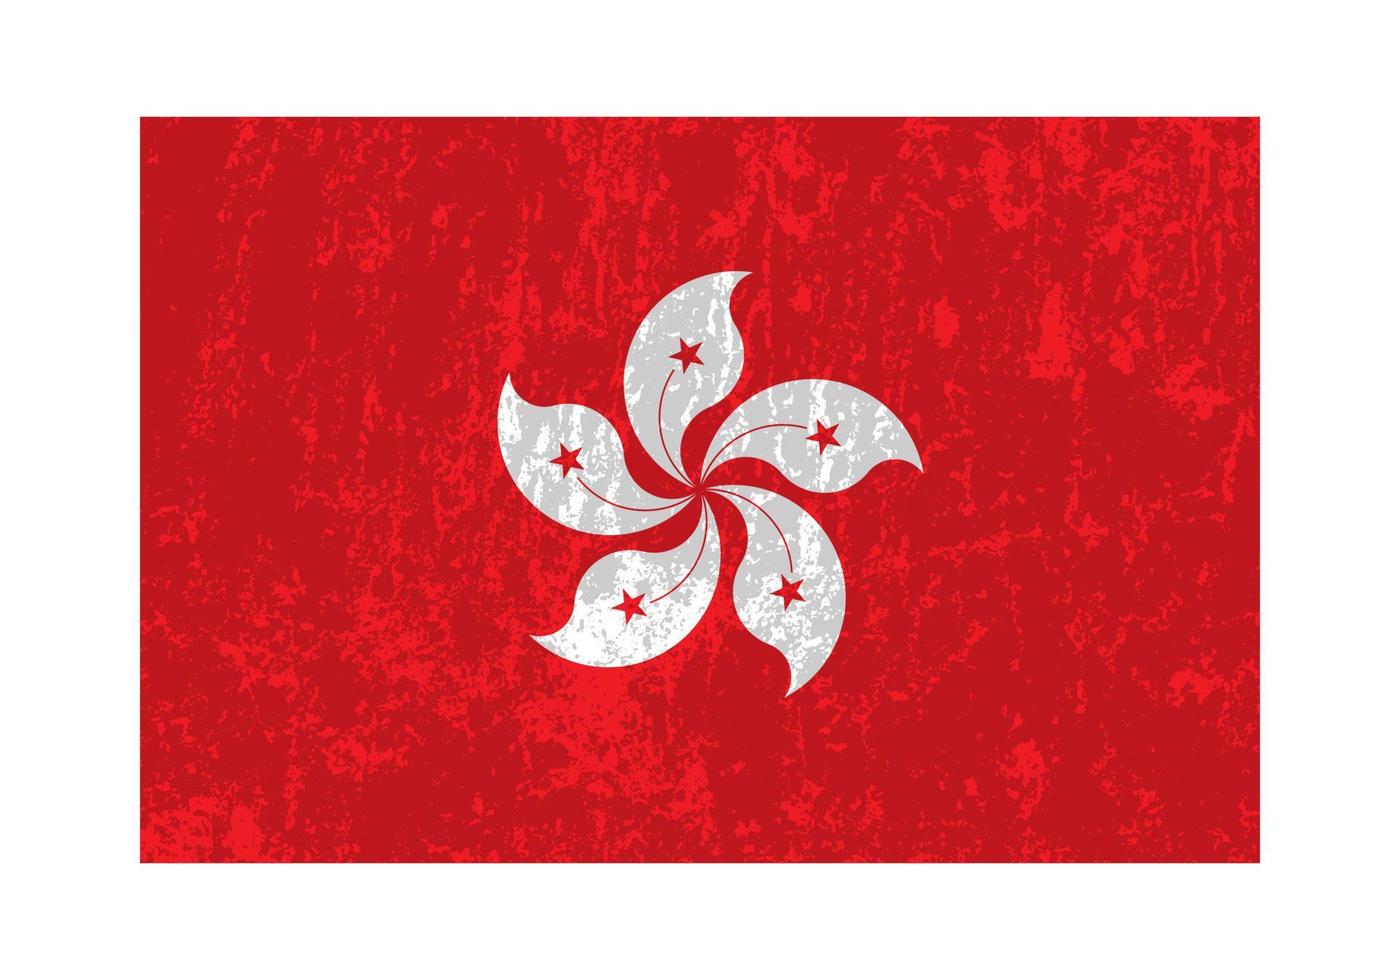 Hong Kong grunge flag, official colors and proportion. Vector illustration.